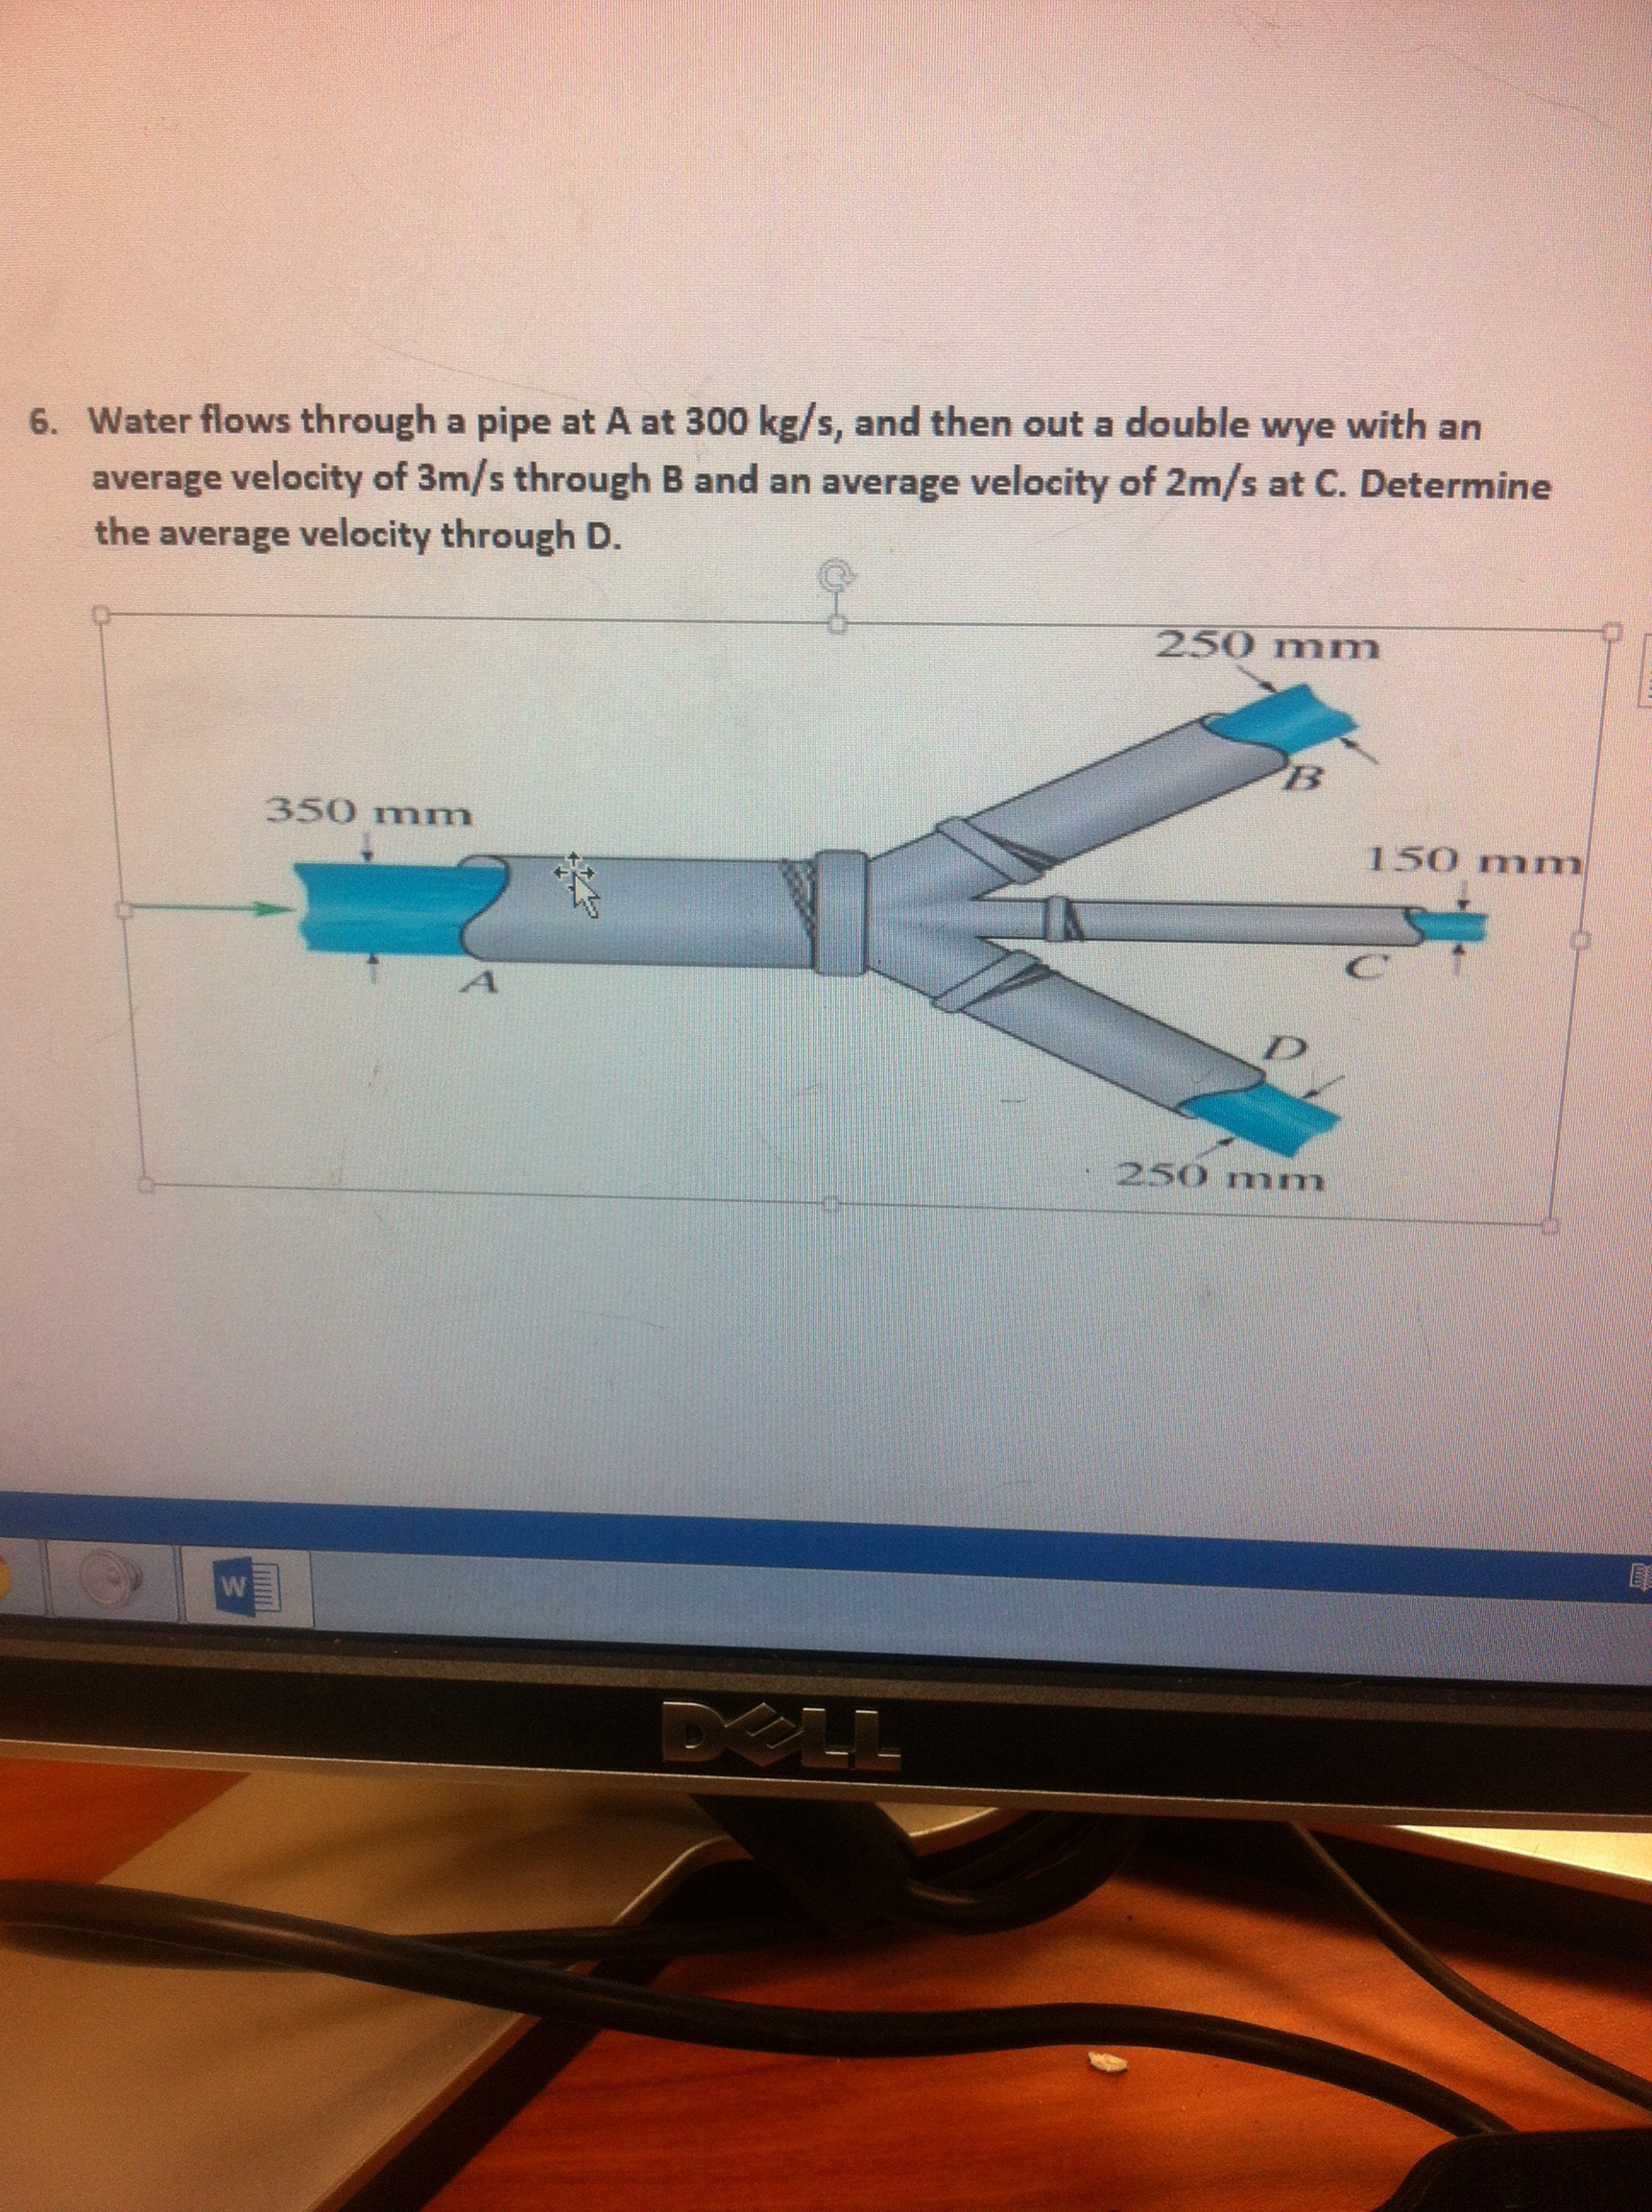 Solved: 6. Water Flows Through A Pipe At A At 300 Kg/s, An ...